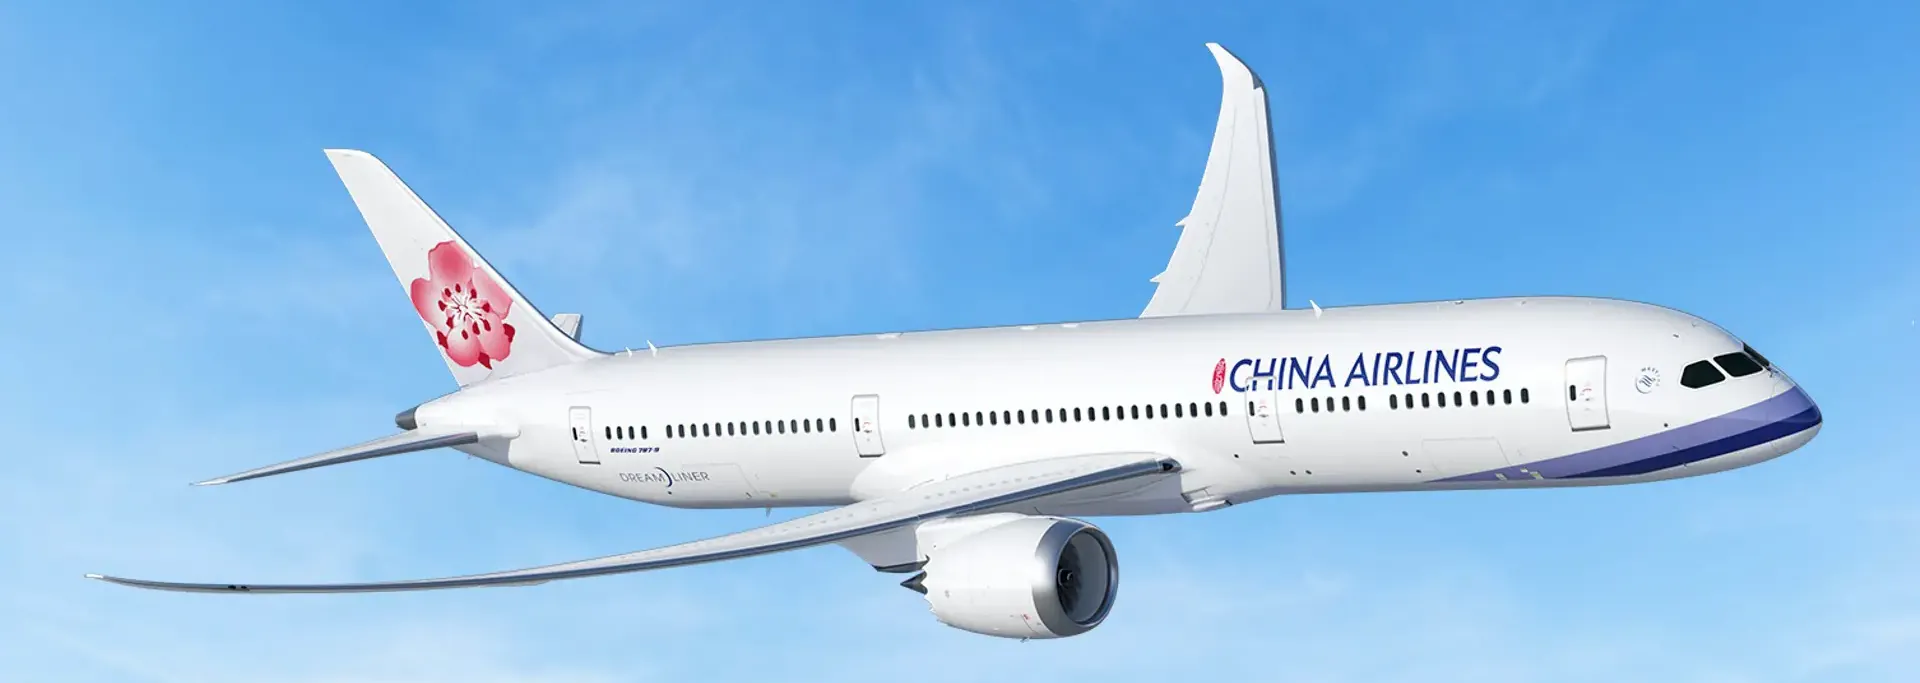 China-Airlines